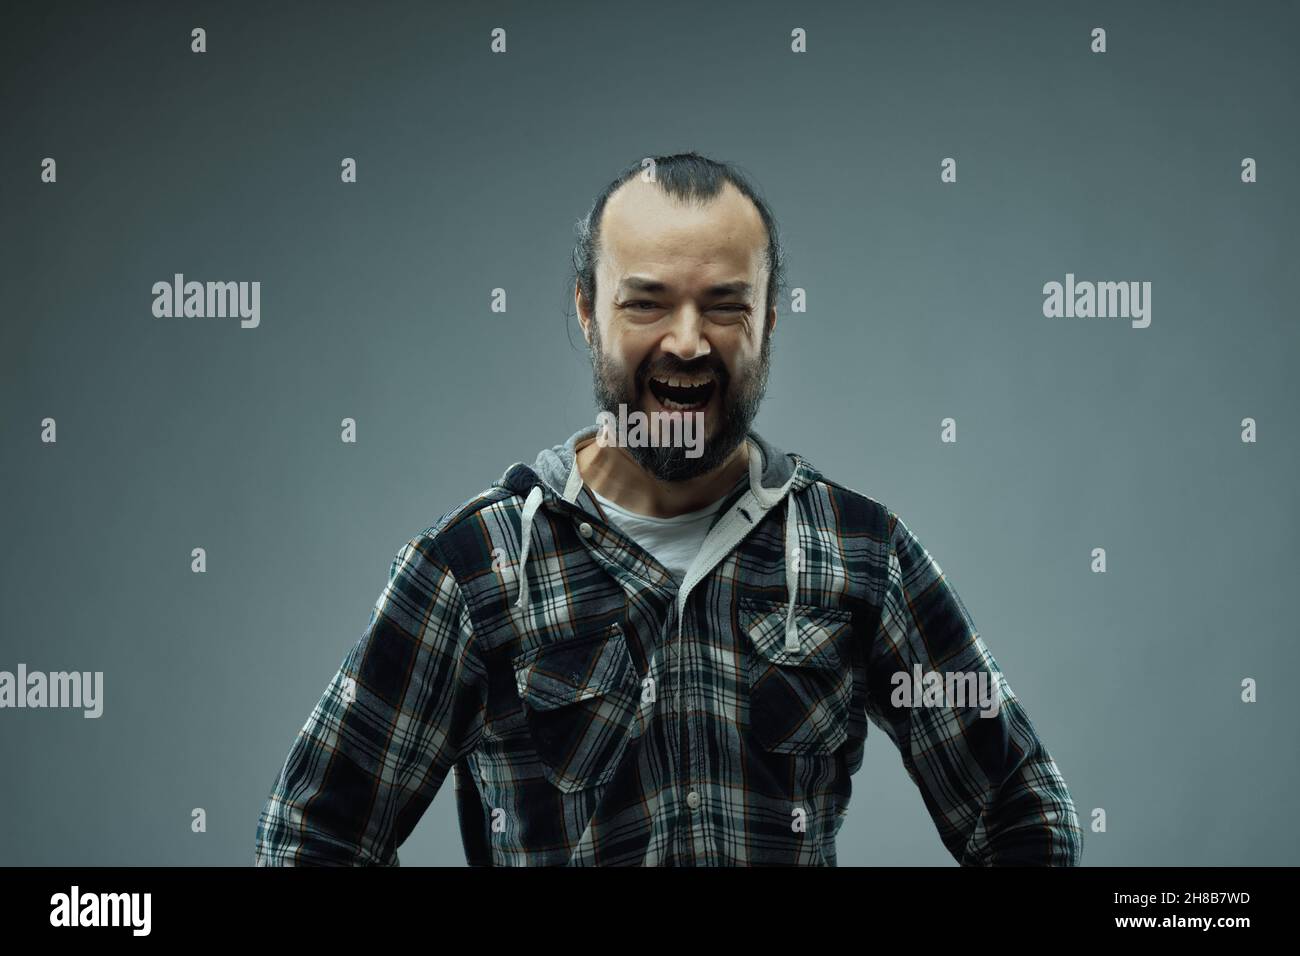 Wicked evil villainous man indulging in manic laughter as he faces the camera with hands on hips over a grey background with vignette Stock Photo